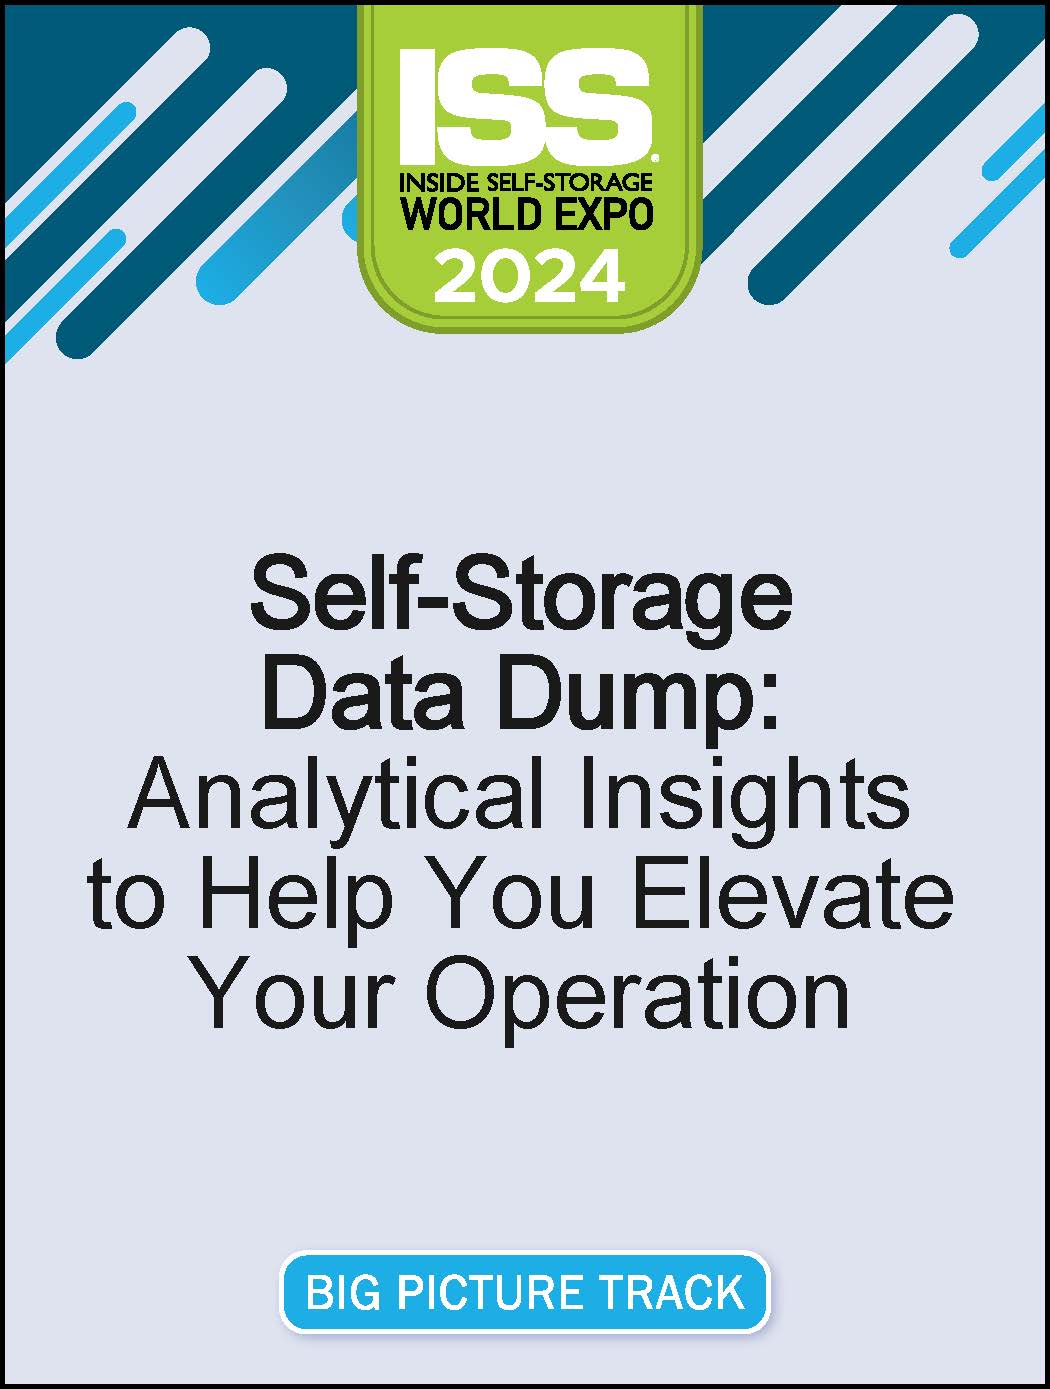 Video Pre-Order - Self-Storage Data Dump: Analytical Insights to Help You Elevate Your Operation